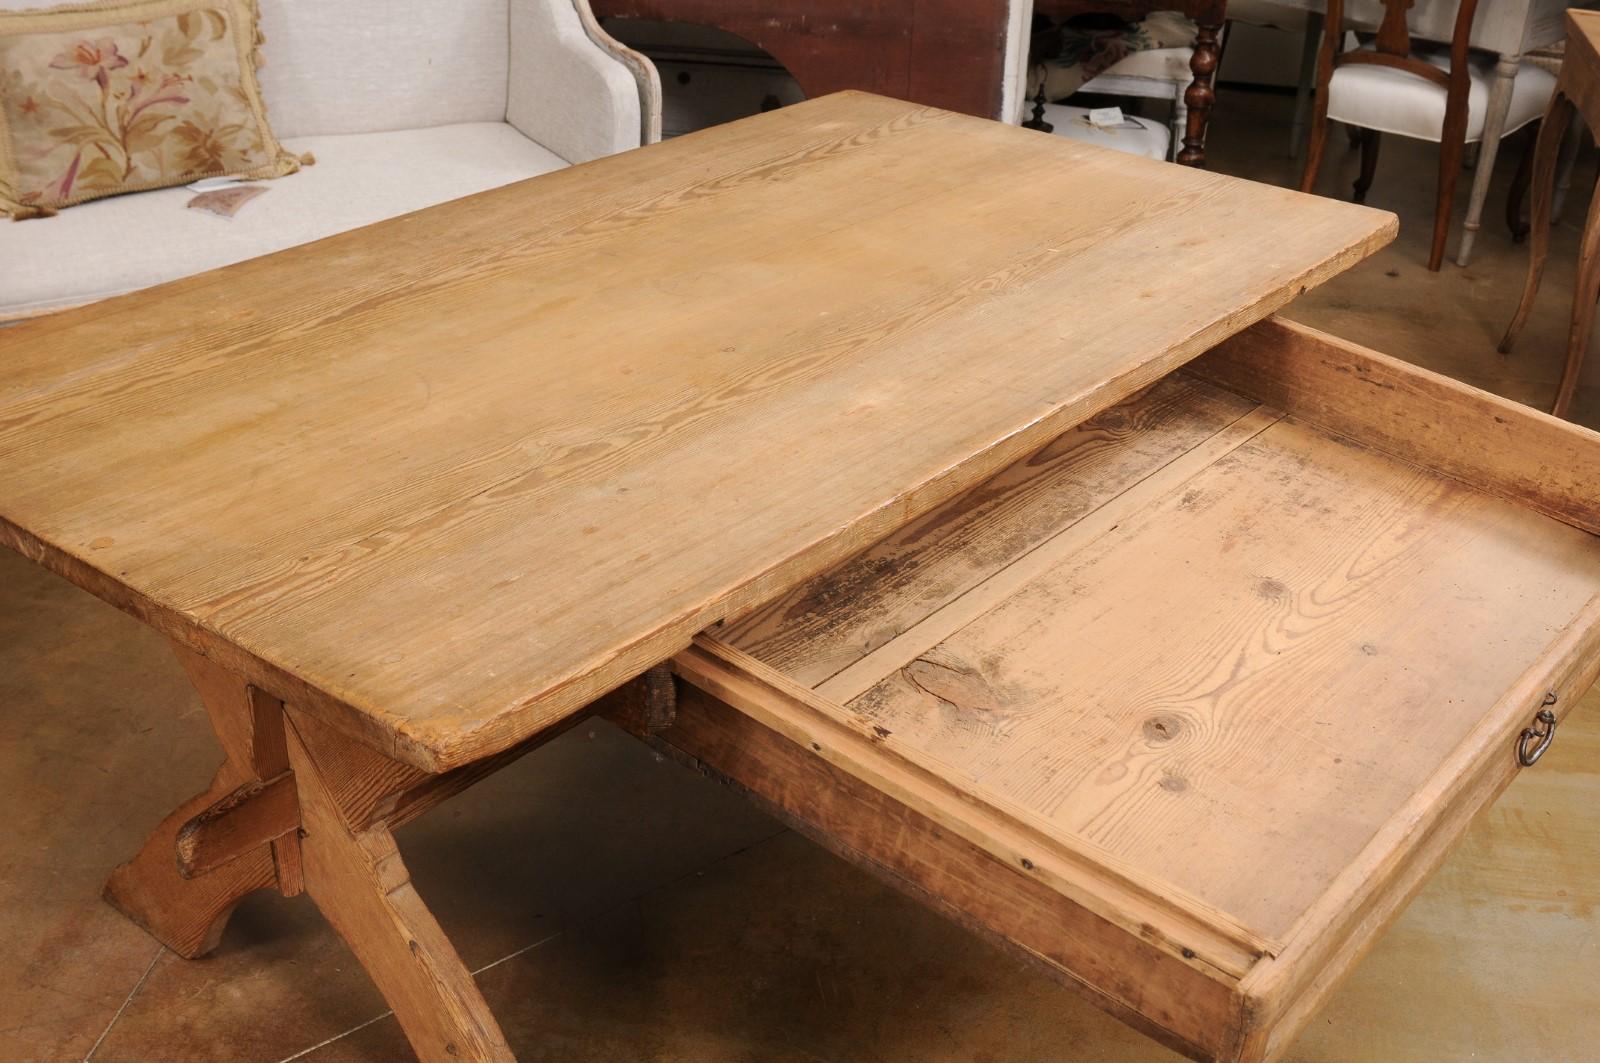 Carved Swedish 1790s European Pine Sawbuck Table with Drawer and Double X-Form Legs For Sale